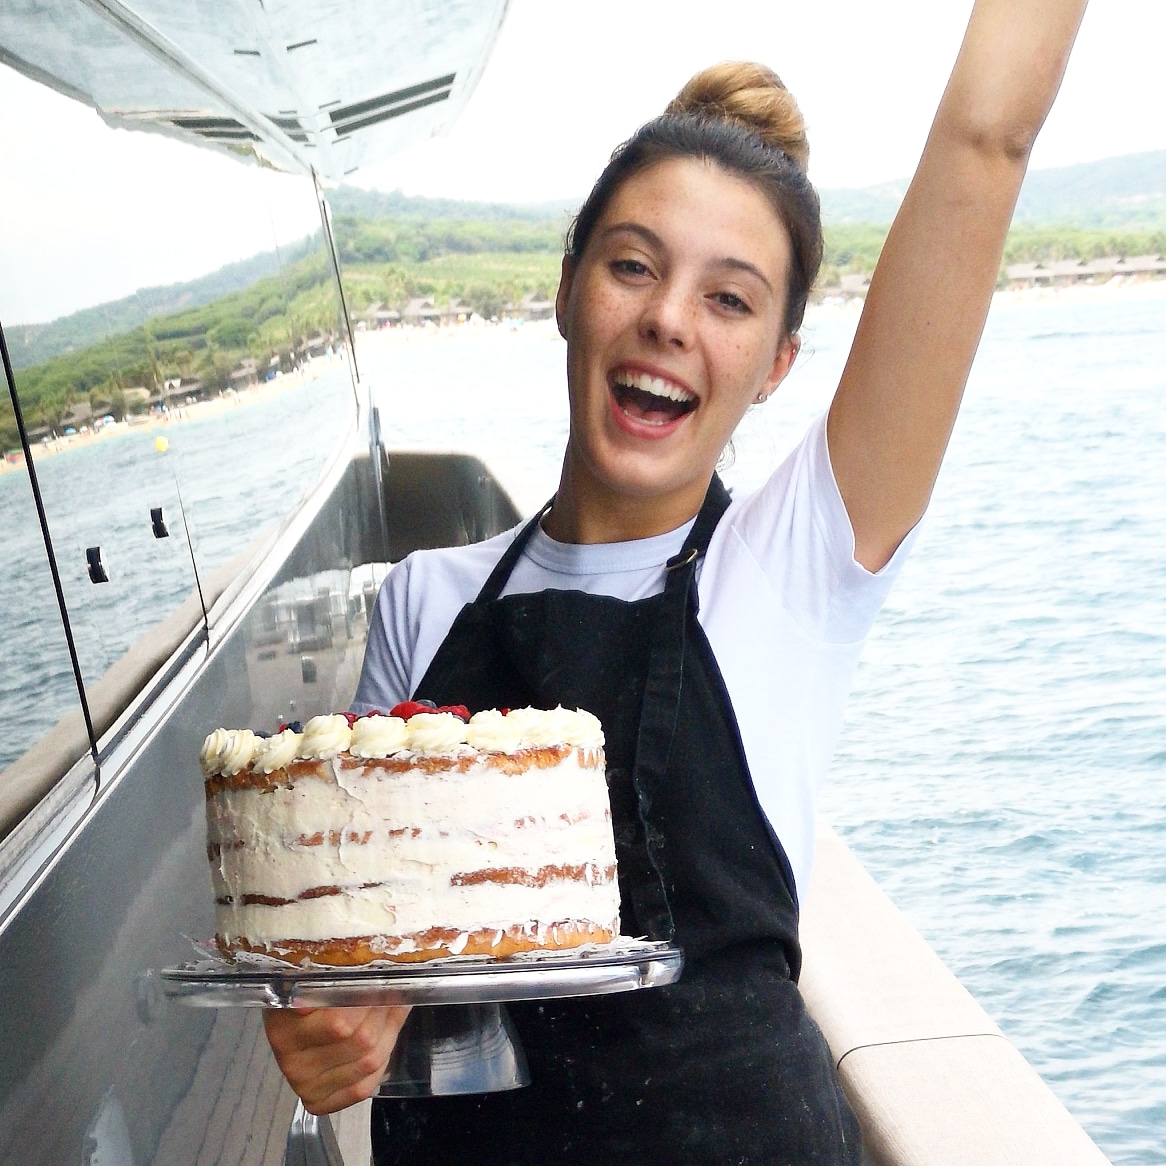 young blonde female yacht chef Jessica Alcock holding a cake on a yacht